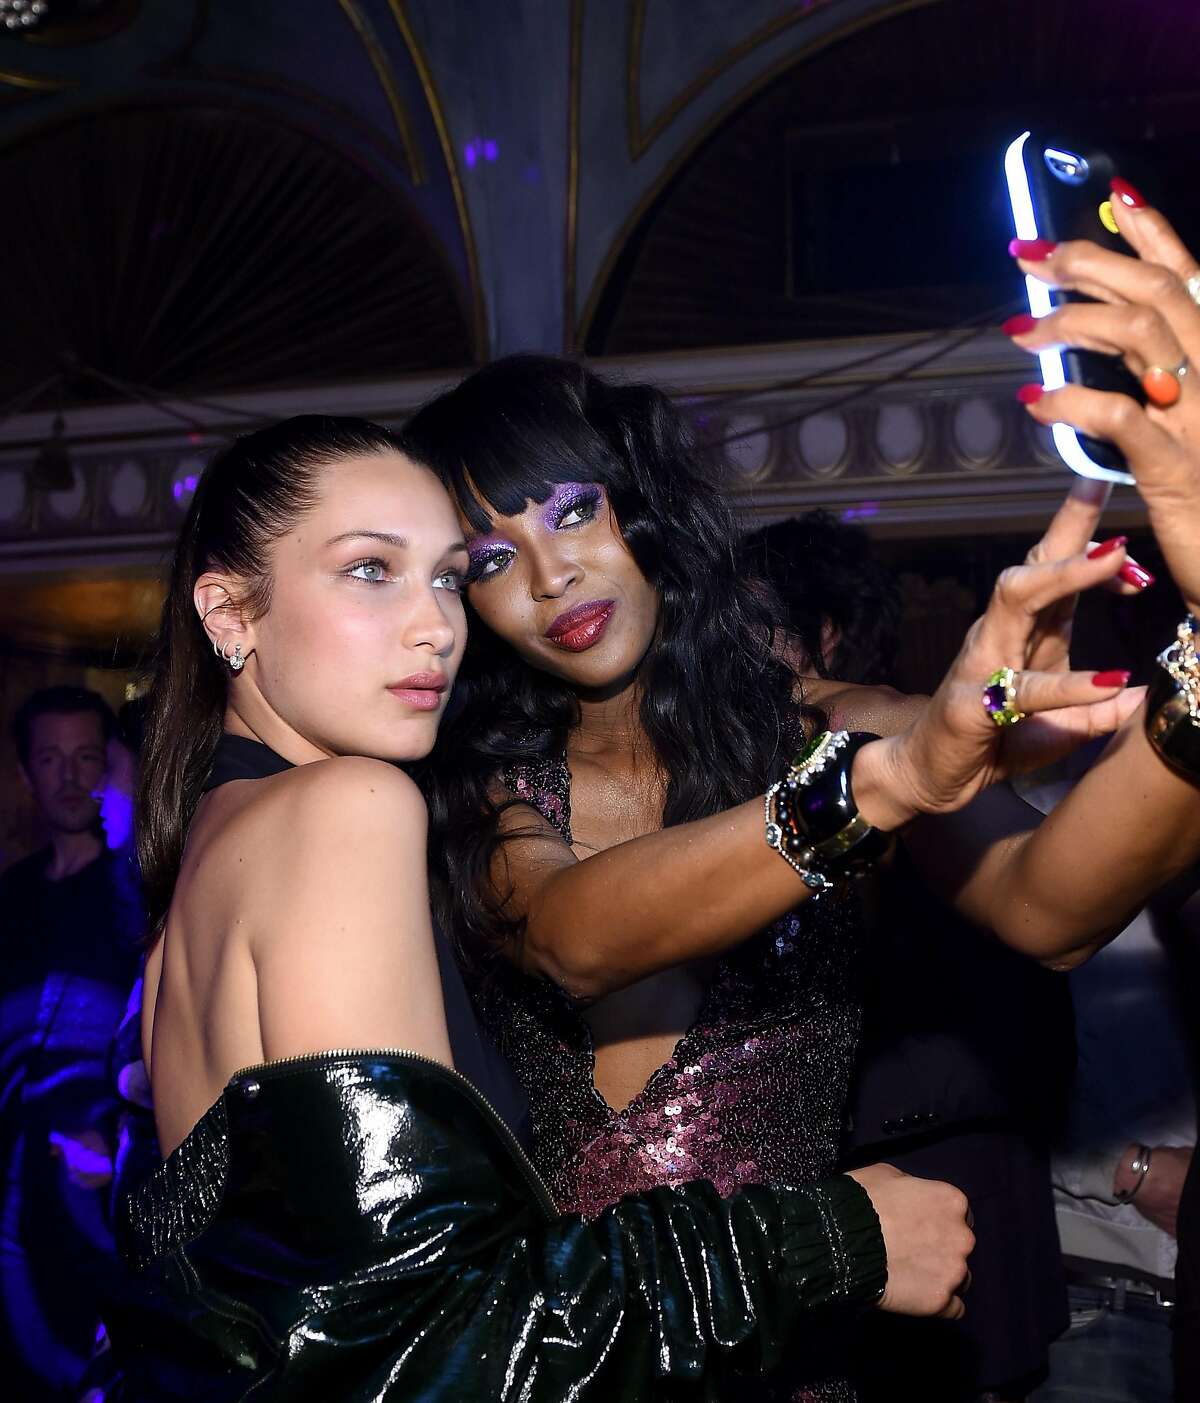 NEW YORK, NEW YORK - APRIL 07: Bella Hadid (L) and Naomi Campbell take a selfie as Marc Jacobs & Benedikt Taschen celebrate NAOMI at The Diamond Horseshoe on April 7, 2016 in New York City. (Photo by Dimitrios Kambouris/Getty Images for Marc Jacobs International, LLC)